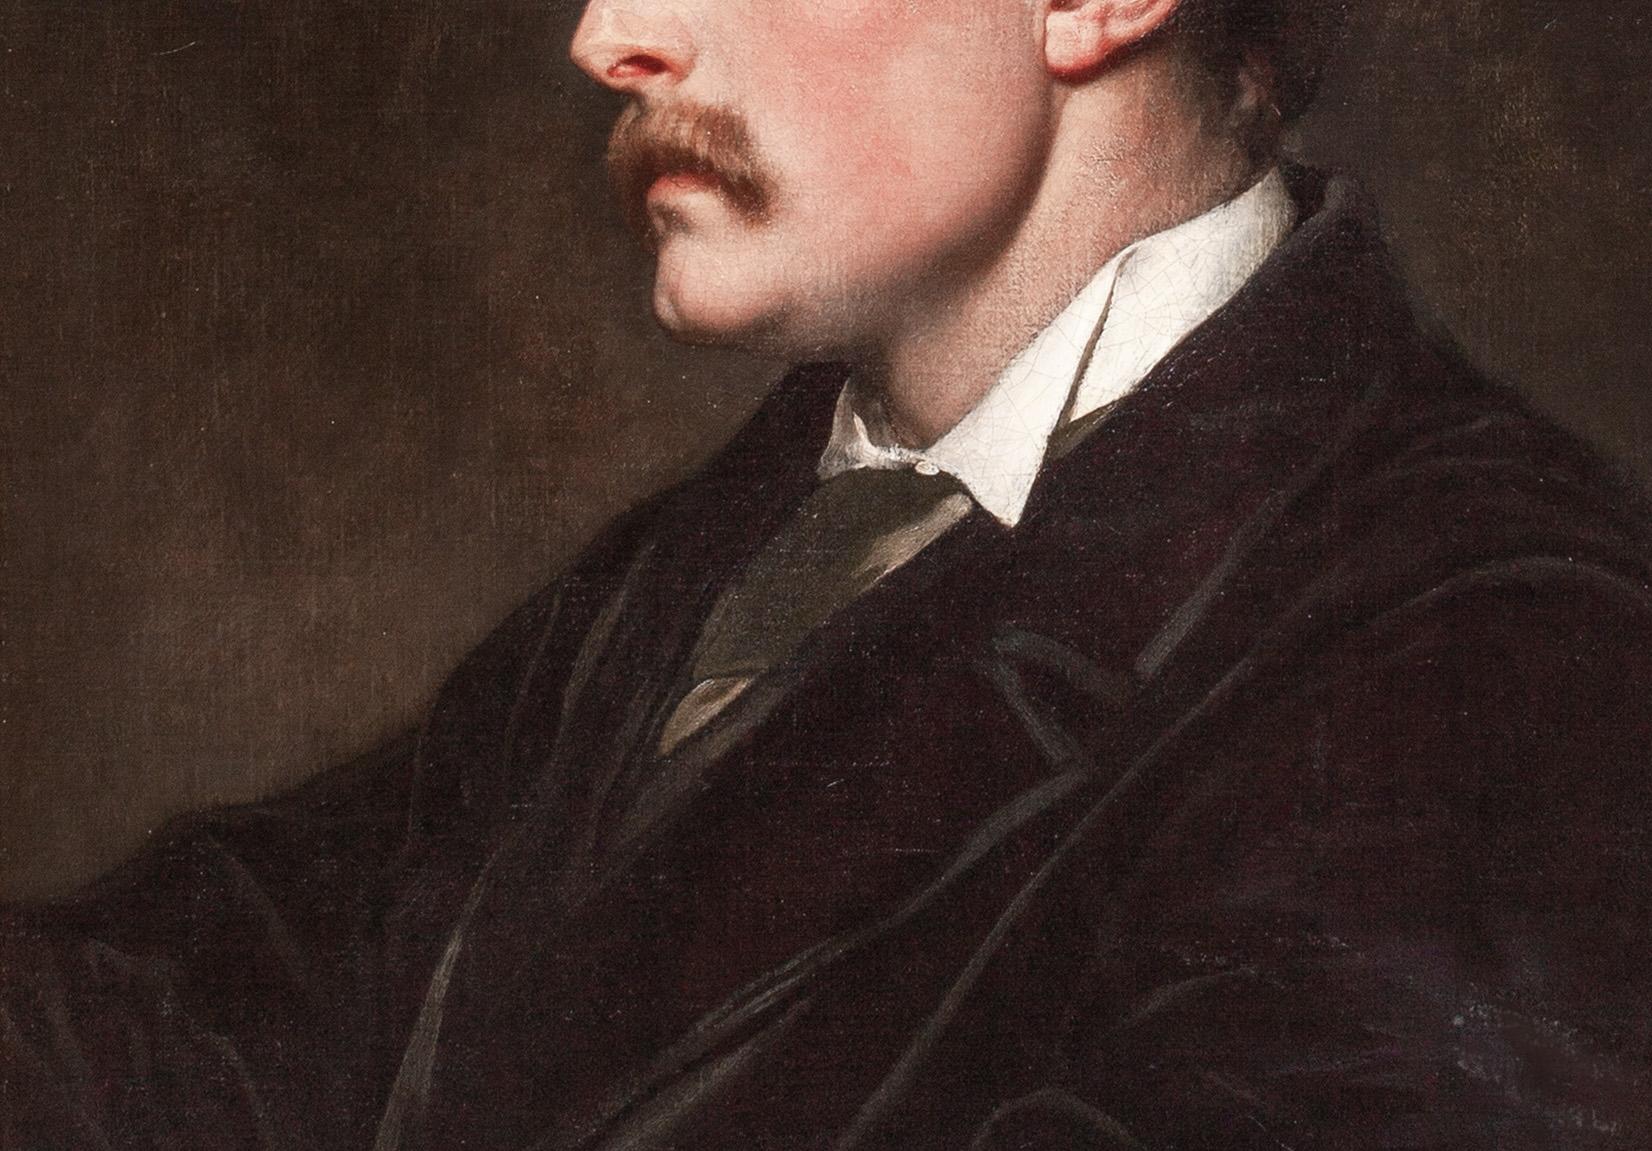 Portrait Of Henry Evans Gordon (1842-1909)

by Frederic, Lord Leighton, PRA (British, 1830-1896)

Large 19th century portrait of Henry Gordon Evans, oil on canvas by Frederick, Lord Leighton. Excellent quality and condition rare original work by the